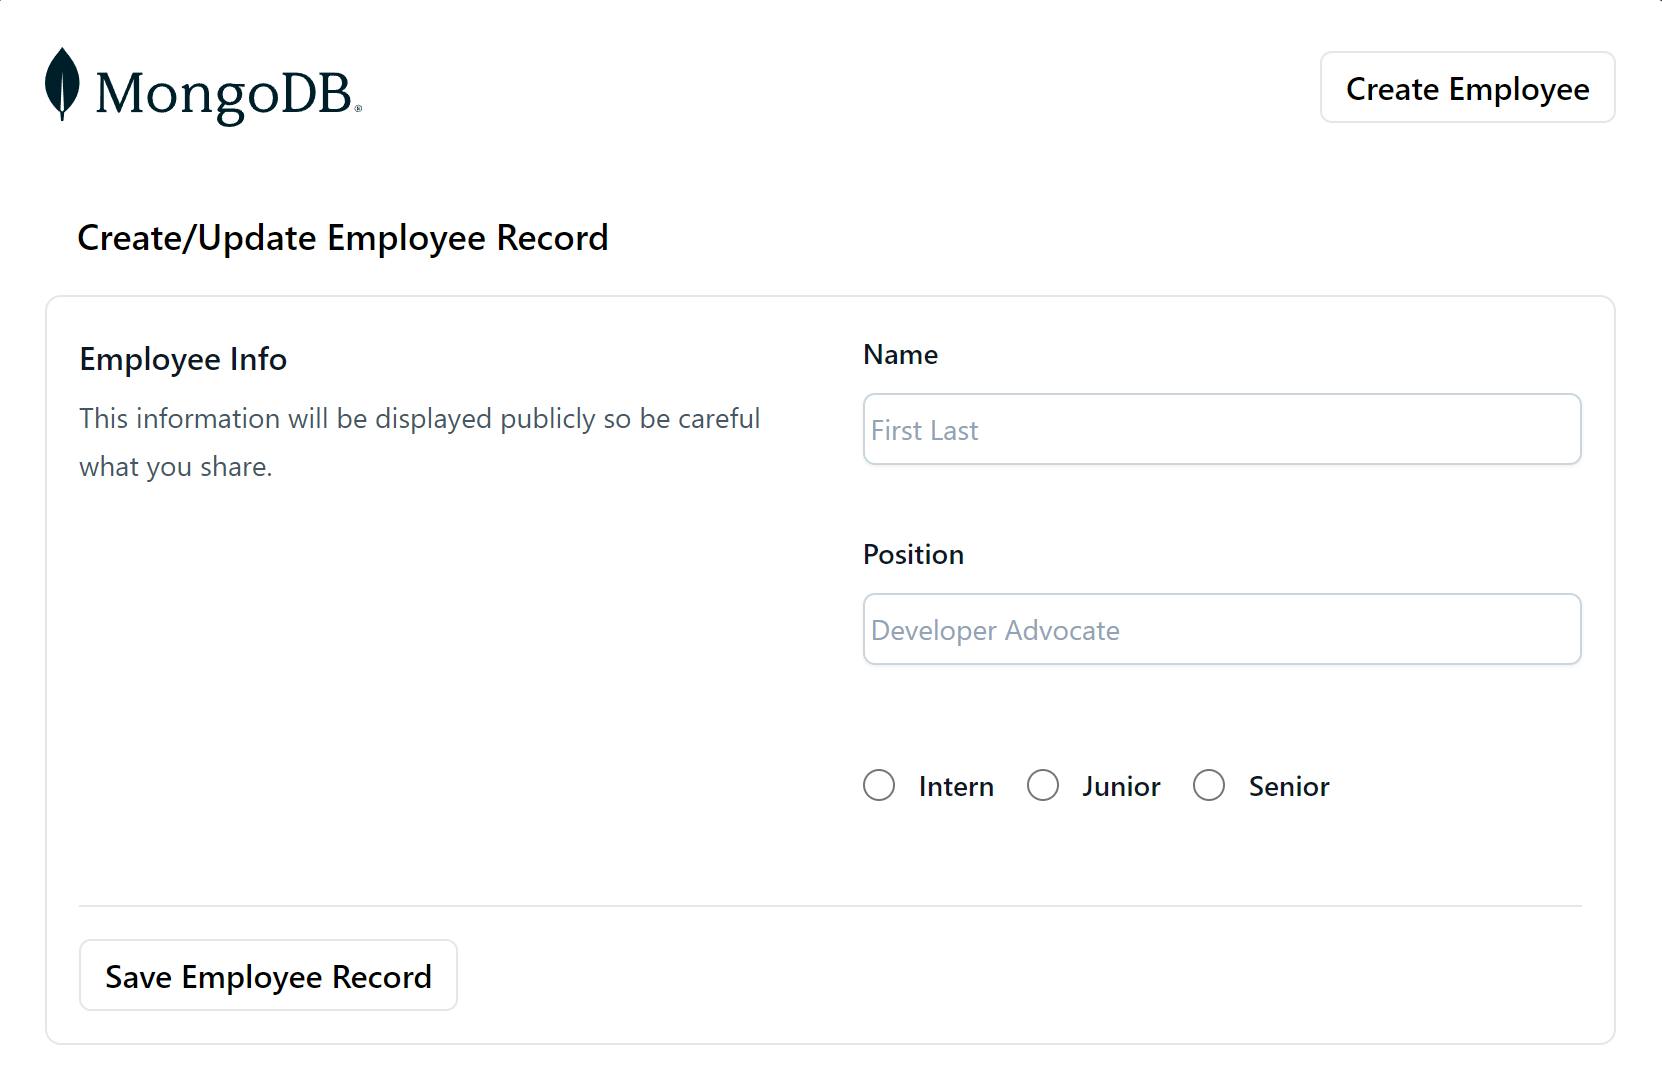 A screenshot depicting the process of creating and updating an employee record.